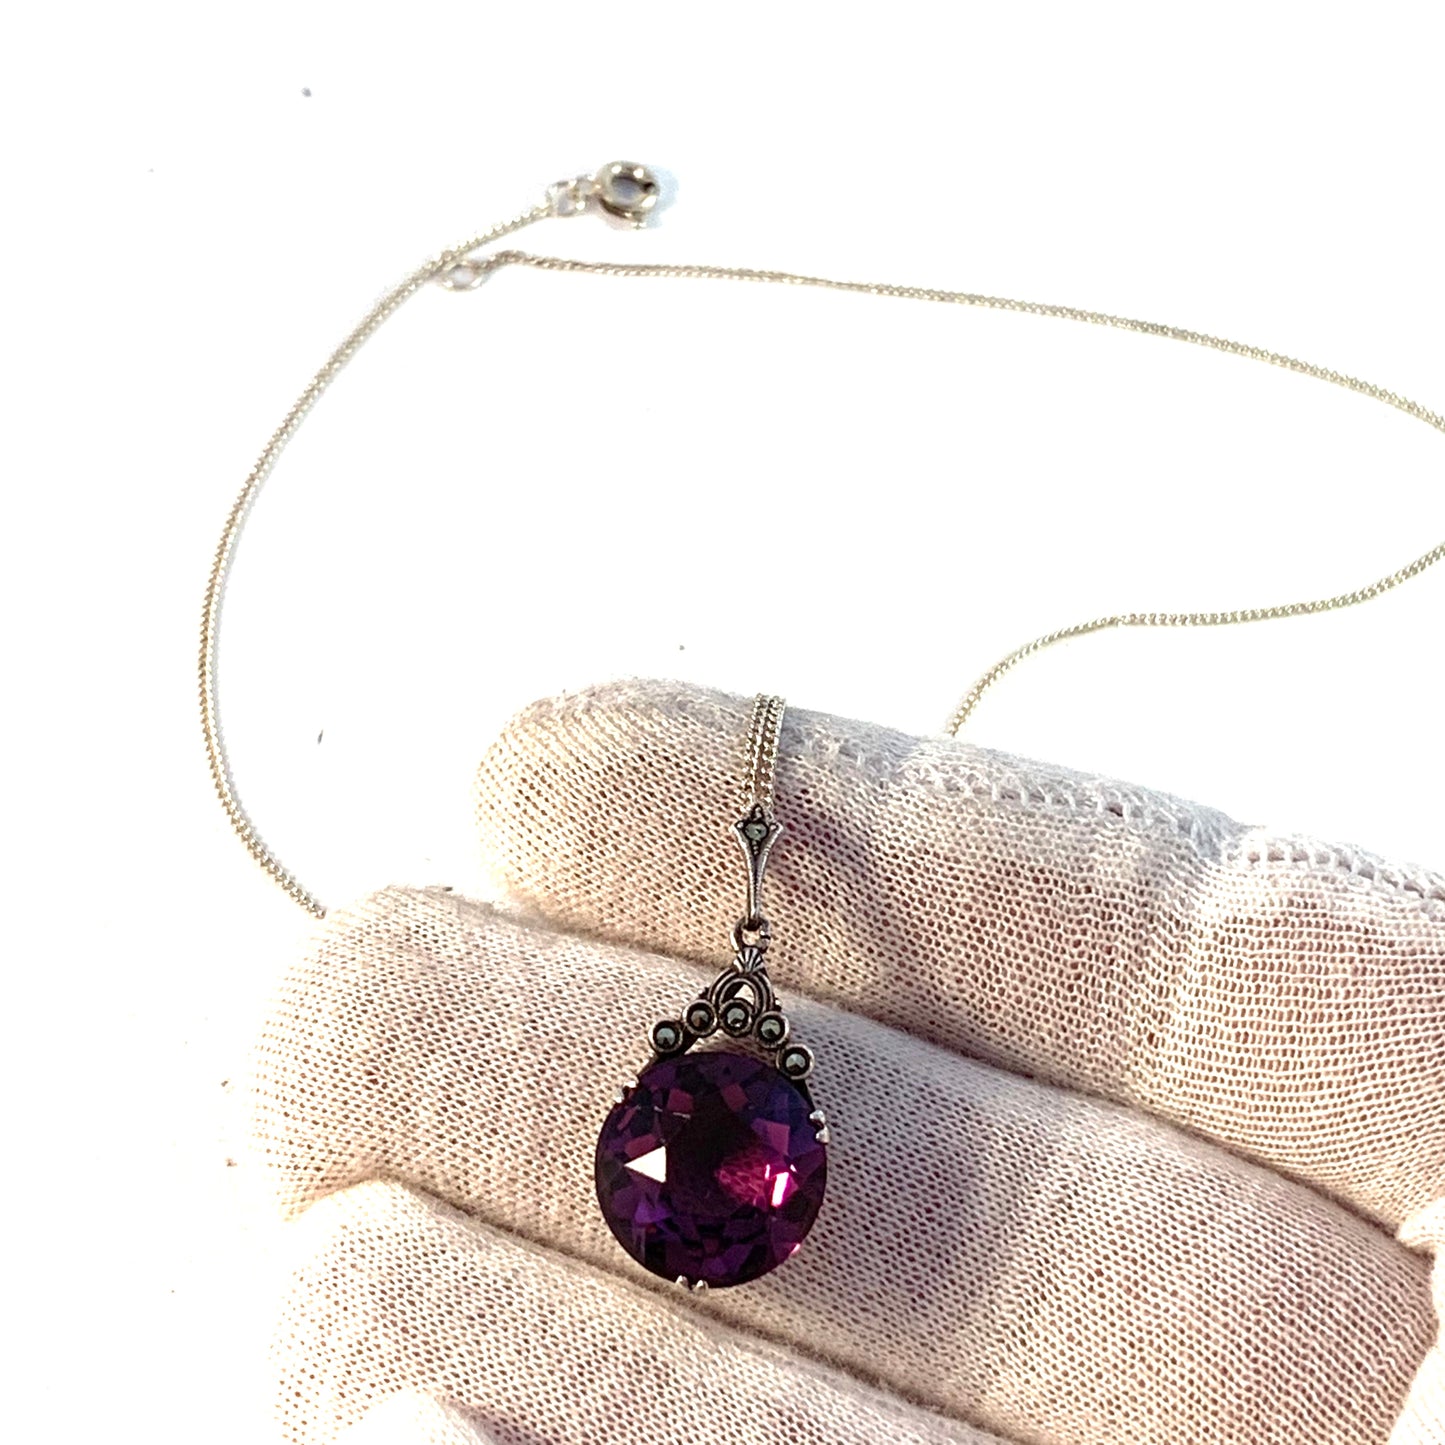 Swedish Import 1930-40s Solid 830 Silver Amethyst Marcasite Pendant Necklace.